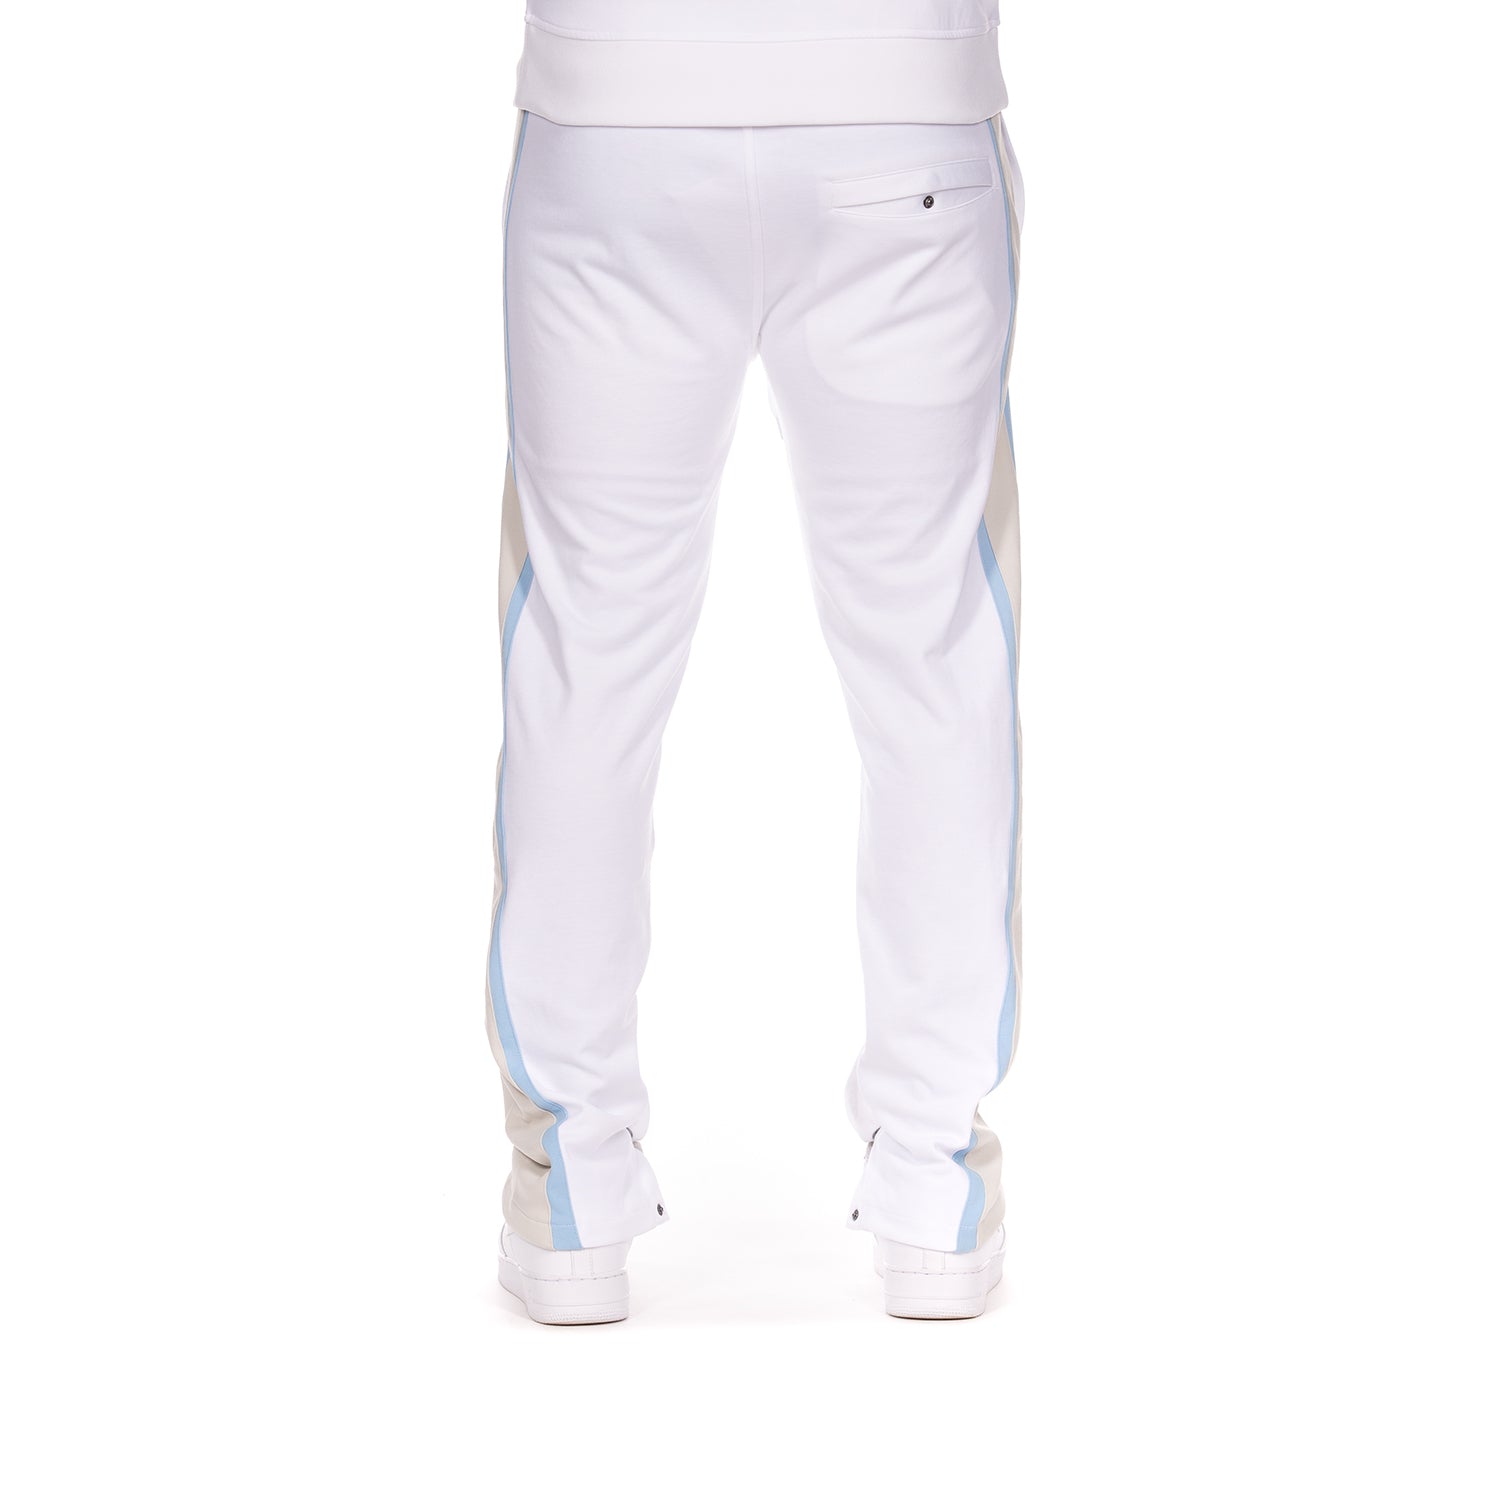 Needles Track Pant Poly Smooth - Fk193-bwn - Sneakersnstuff (SNS) |  Sneakersnstuff (SNS)